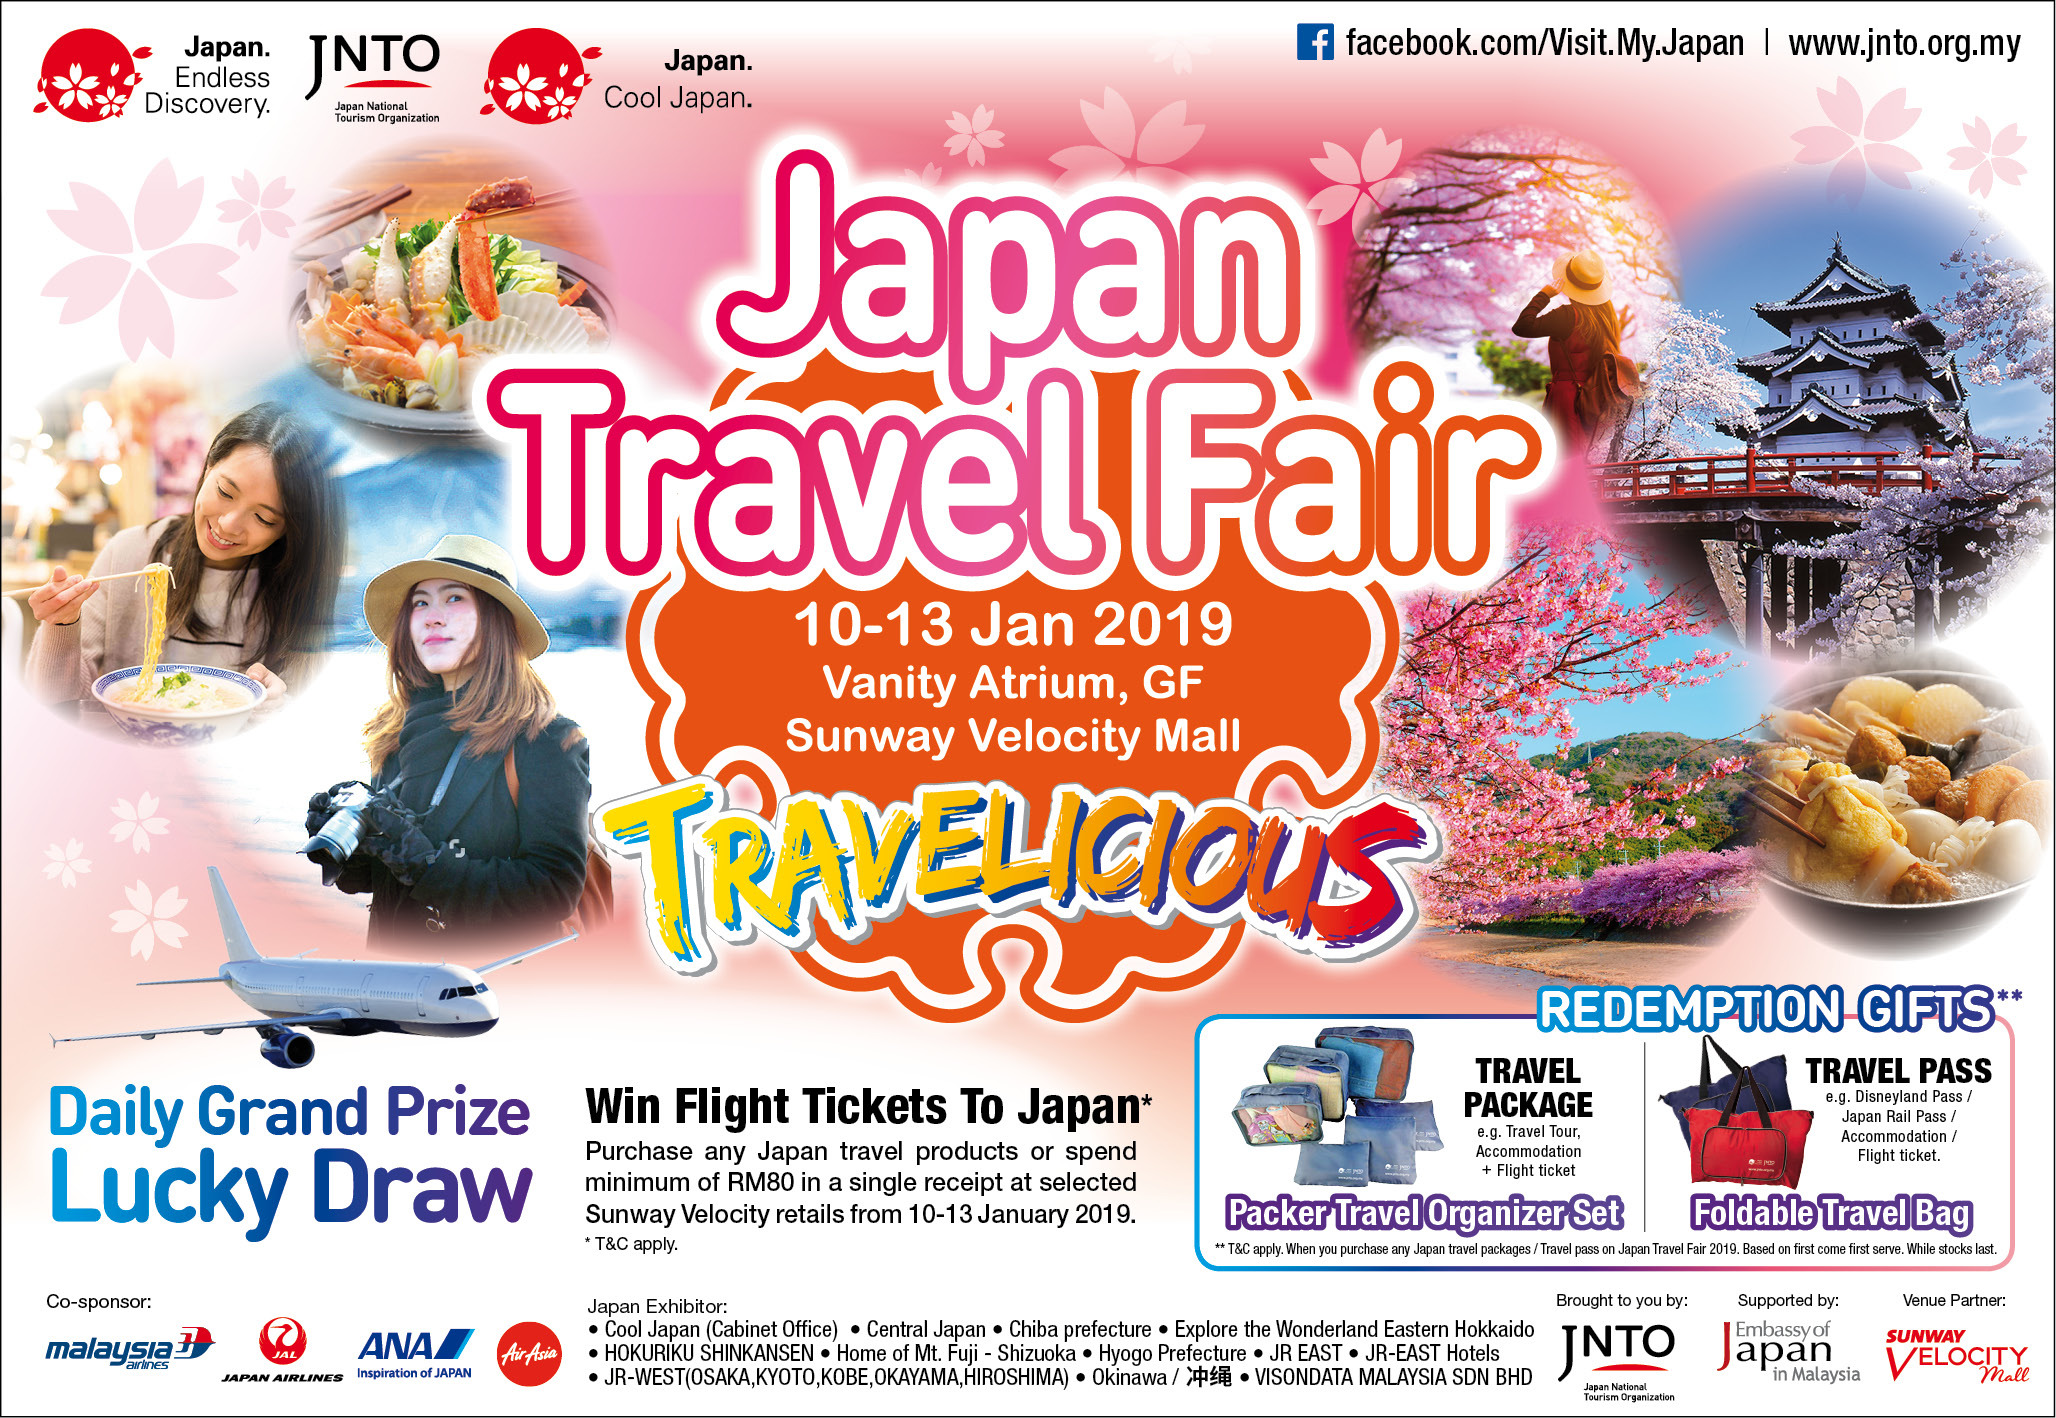 【Event】January 12 /Japan Travel Fair - Mr. Takuya HIRAI Minister of State for Cool Japan Strategy will attend the talk show @ KL